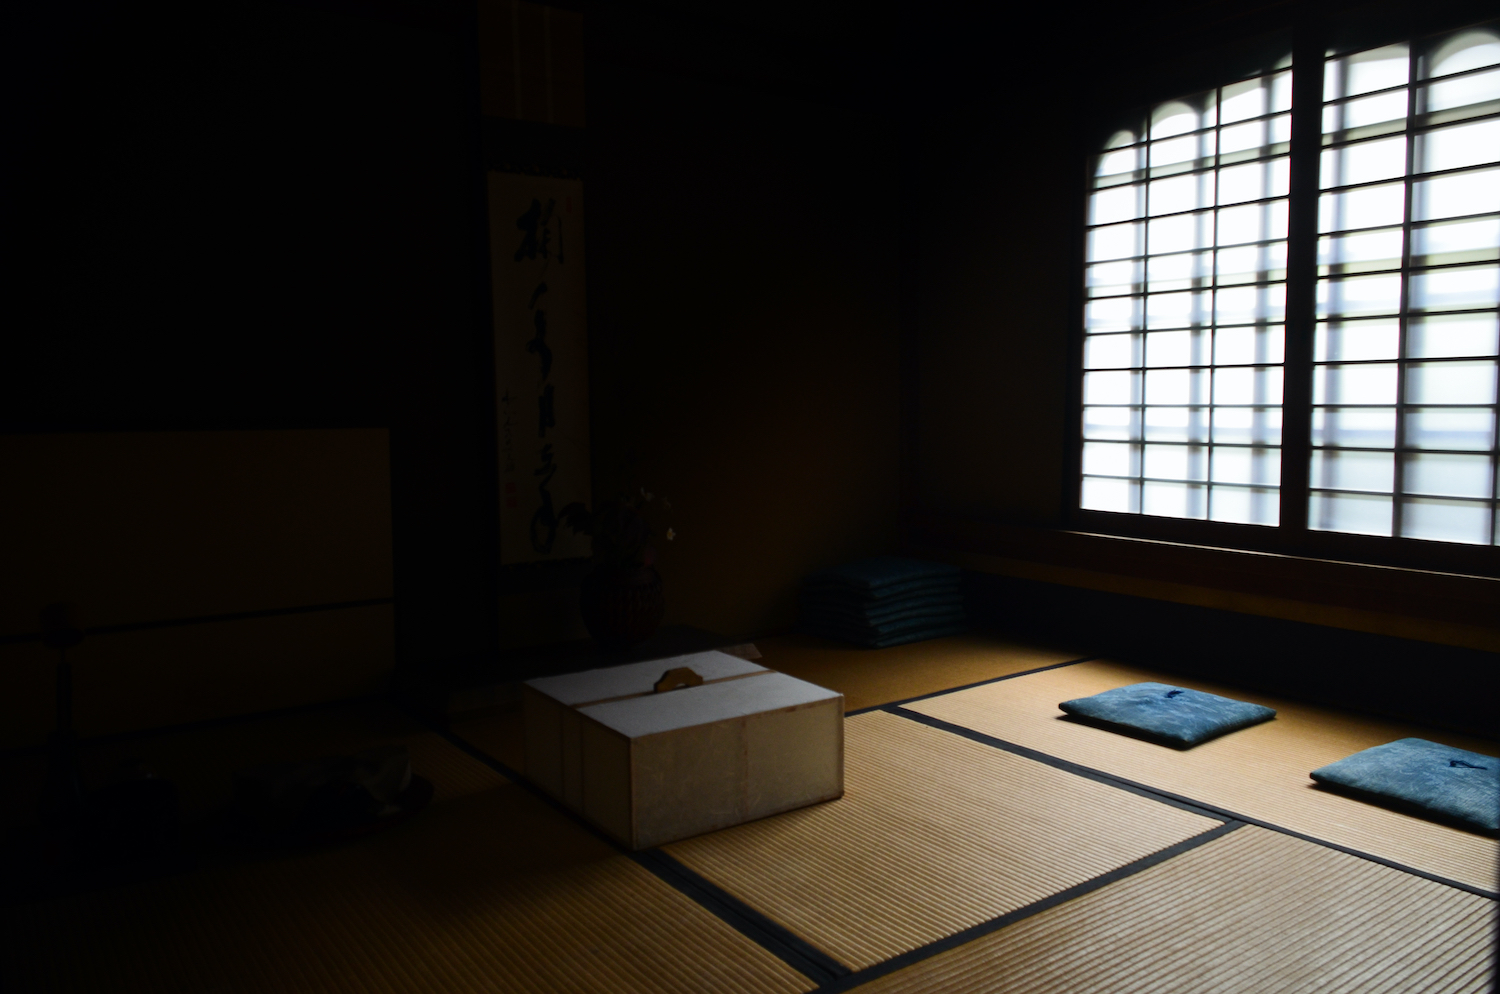 Traditional Japanese Tea room in Zuihou In Temple in Daitokuji Complex : Kyoto, Japan : October 23, 2015